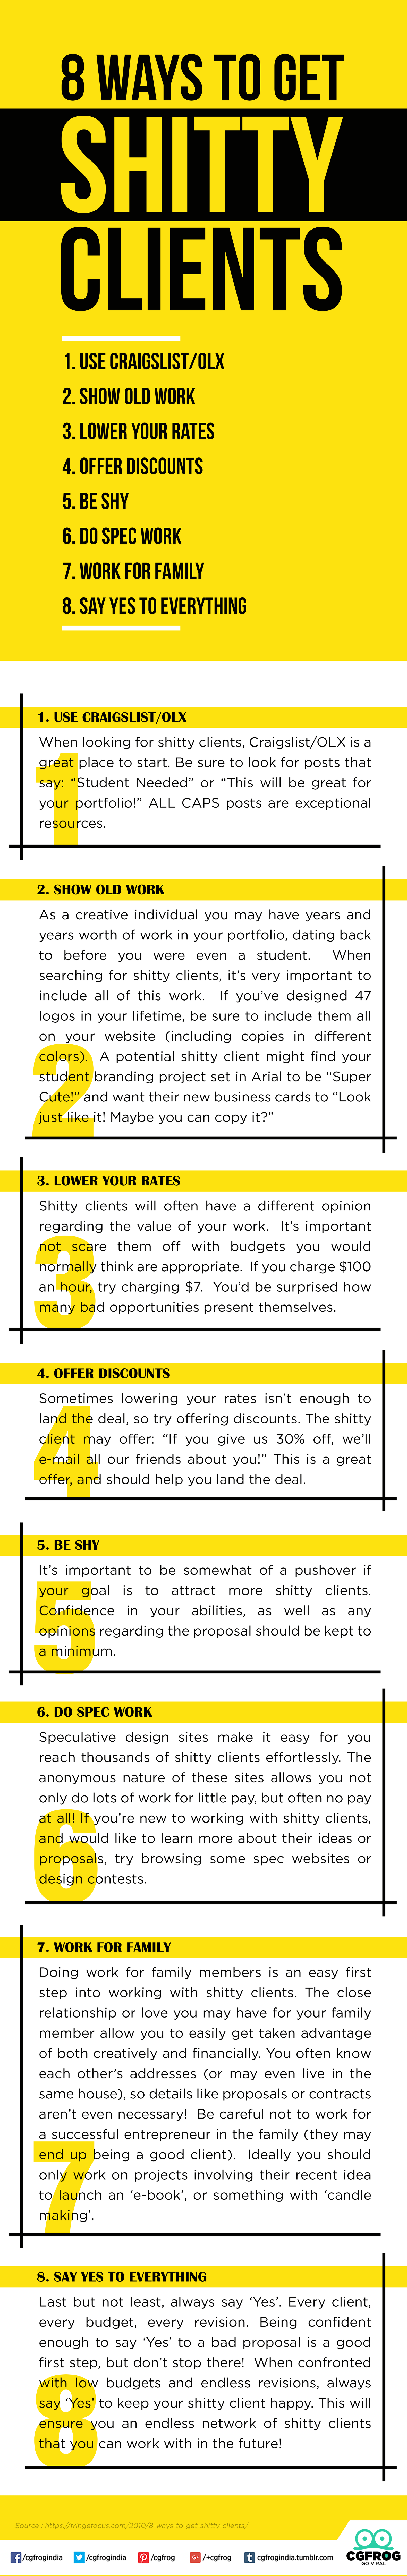 8 Ways to Get Shitty Clients